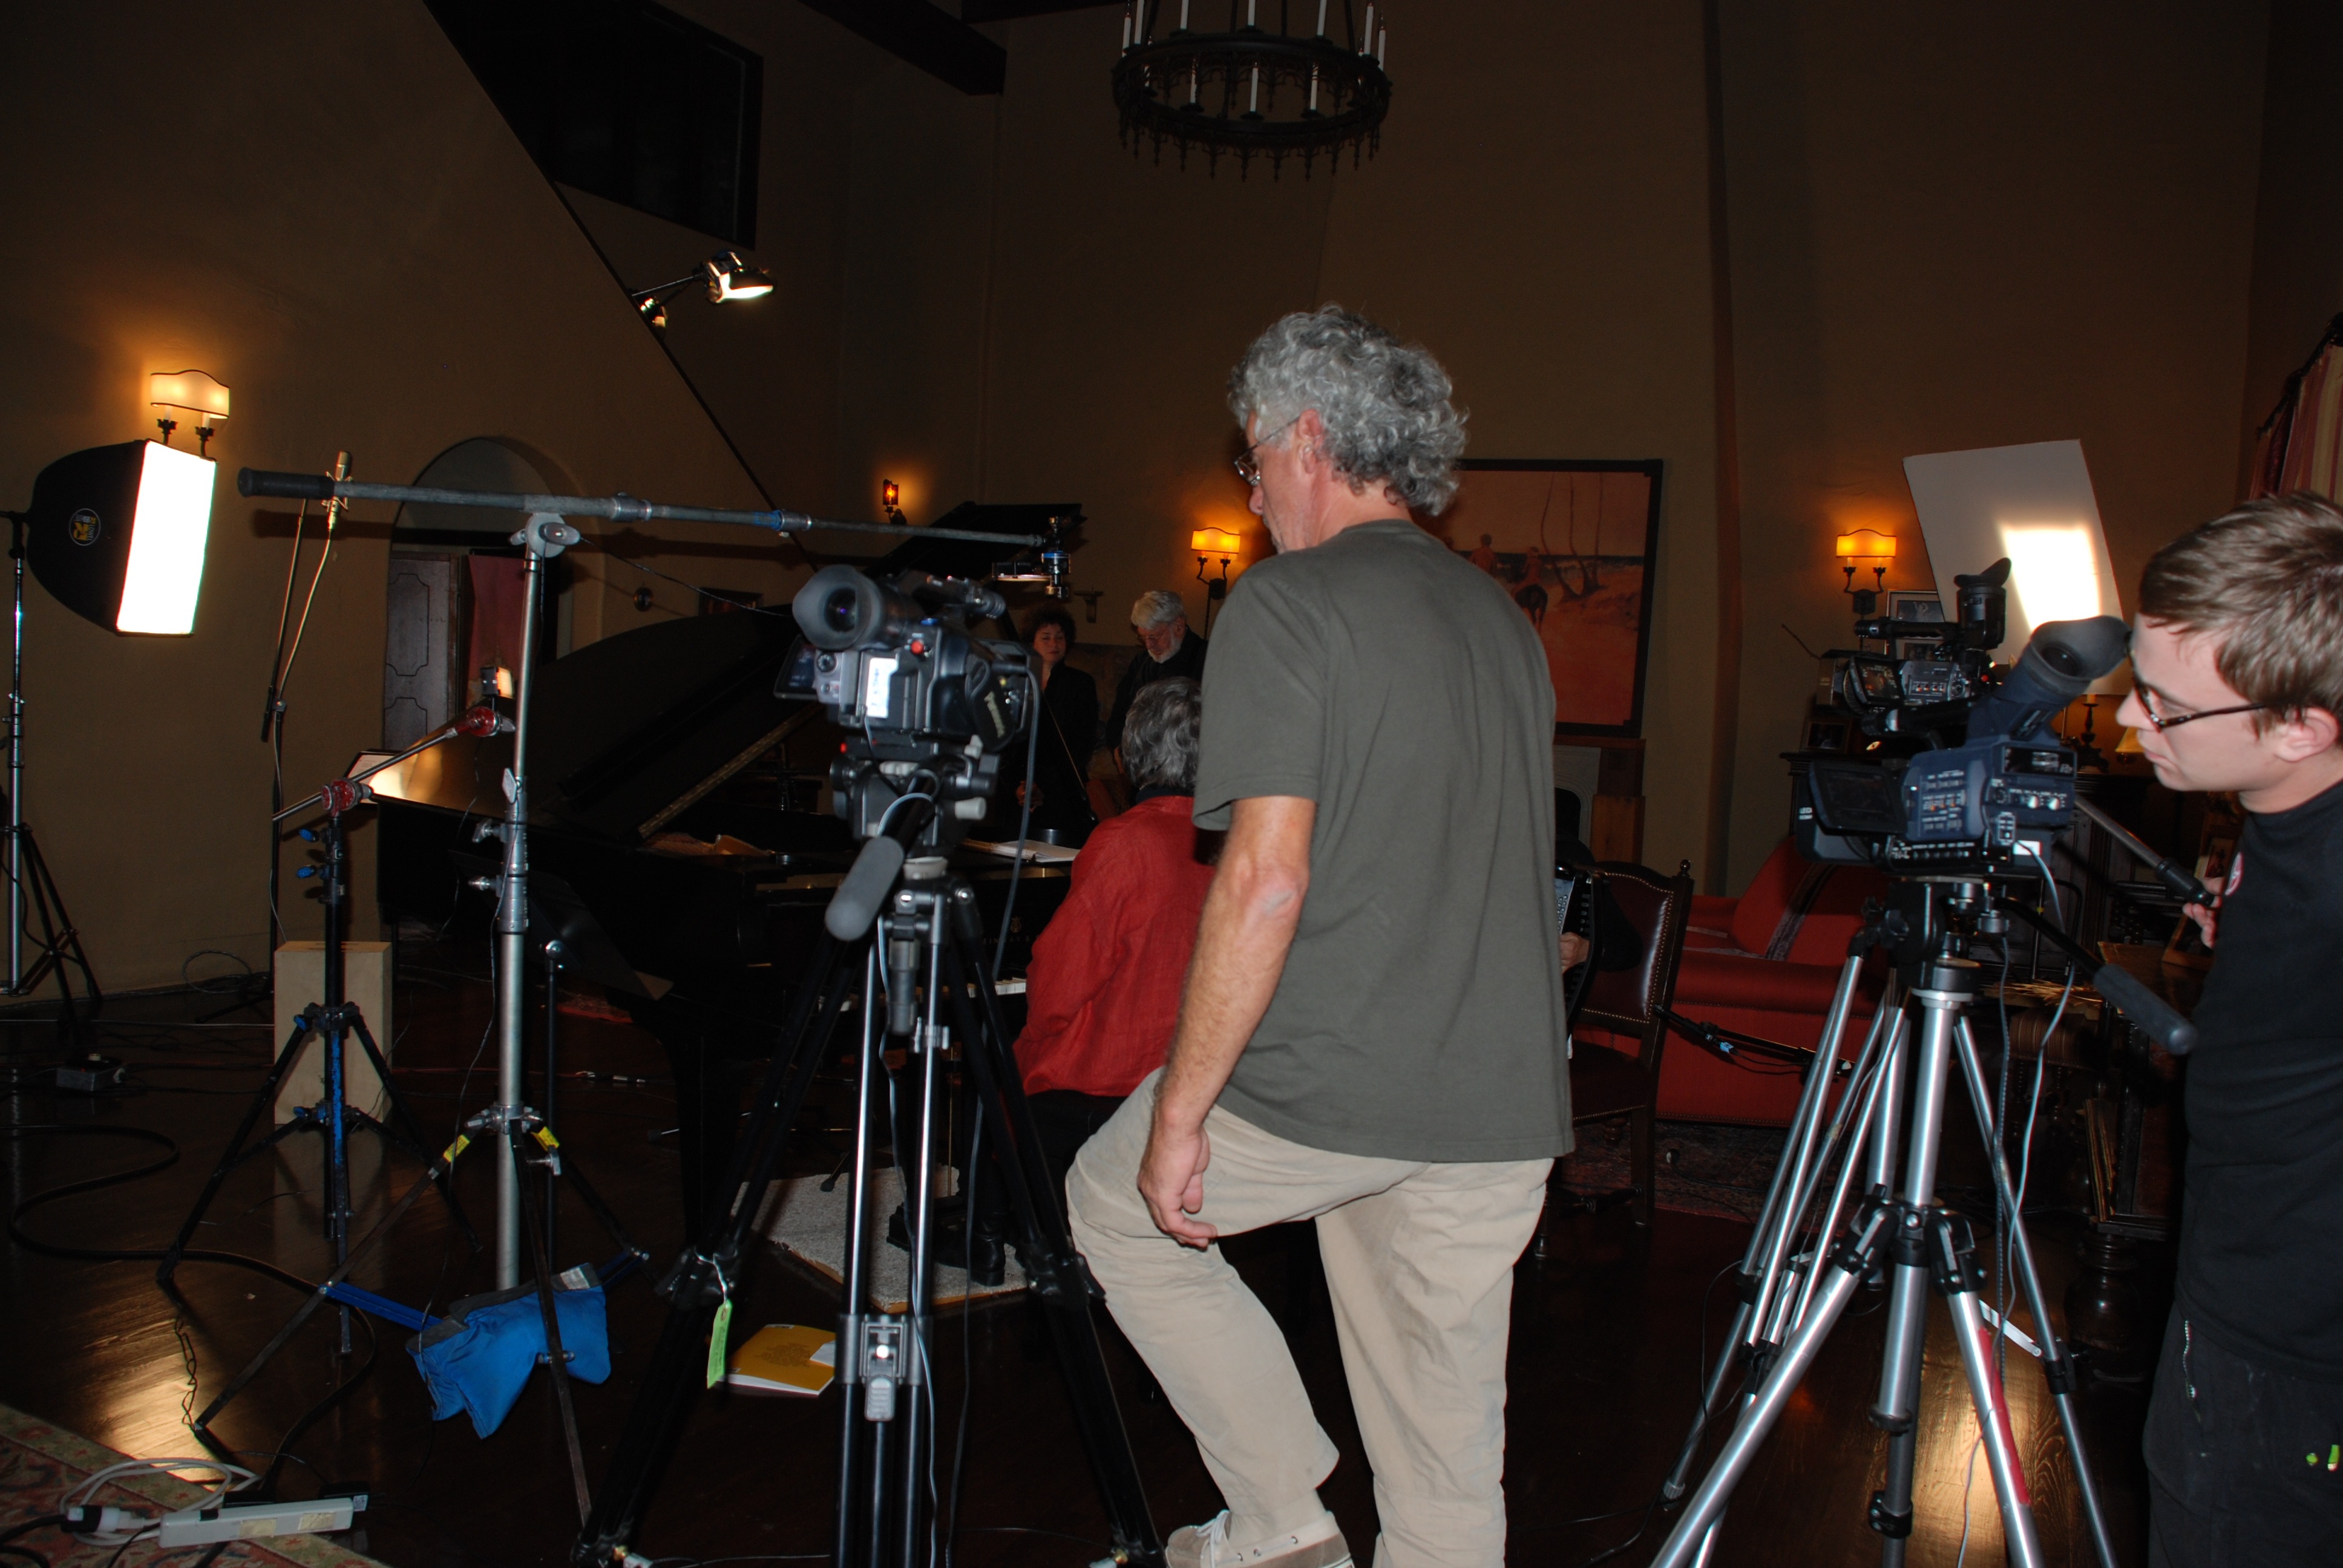 On setof producer/director Michele Noble's Journey 4 Artists with d.p. Geza Sinkovics and cast and crew as they set up